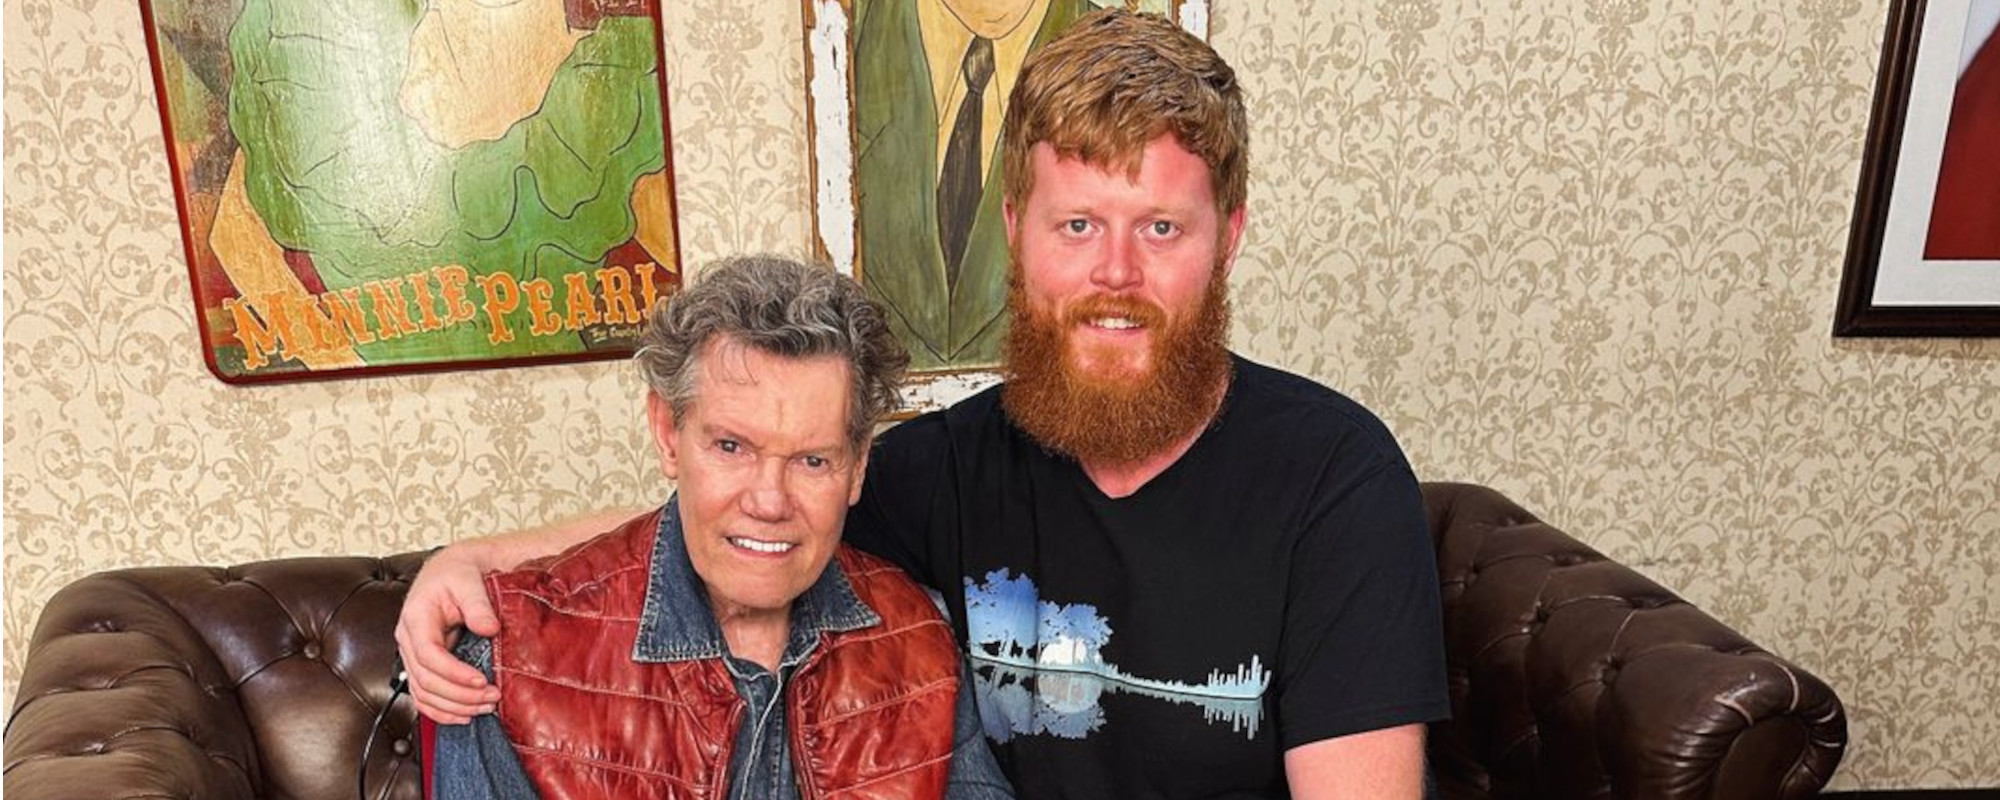 Randy Travis Has Strong Reaction to Oliver Anthony’s Ryman Auditorium Debut